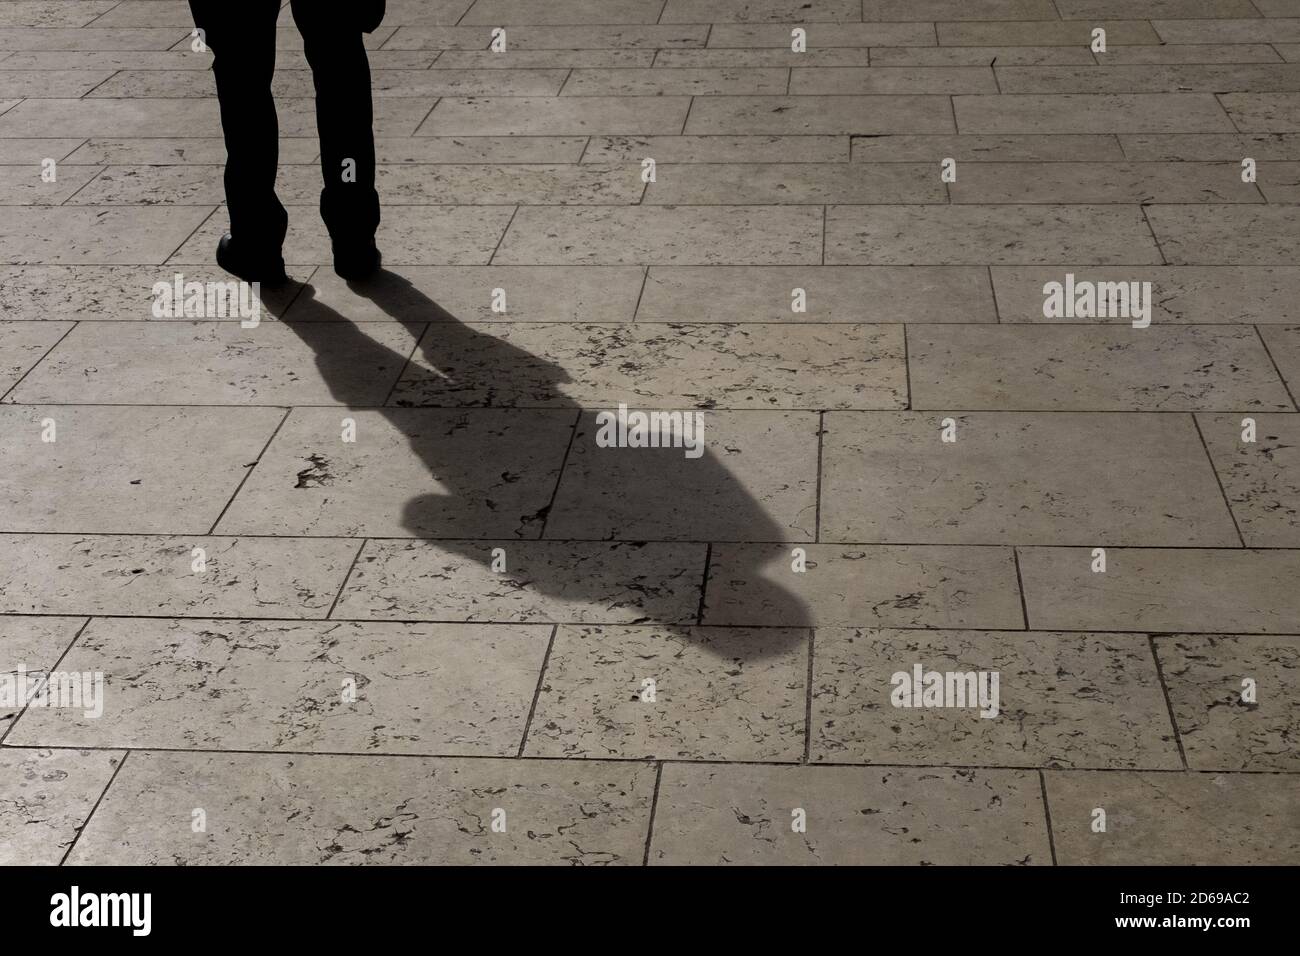 A pedestrian stands casting a long shadow in the spring afternoon sunshine against the stone slabs in the town’s square in the centre of Bournemouth in Dorset. 04 April 2014. Photo: Neil Turner Stock Photo